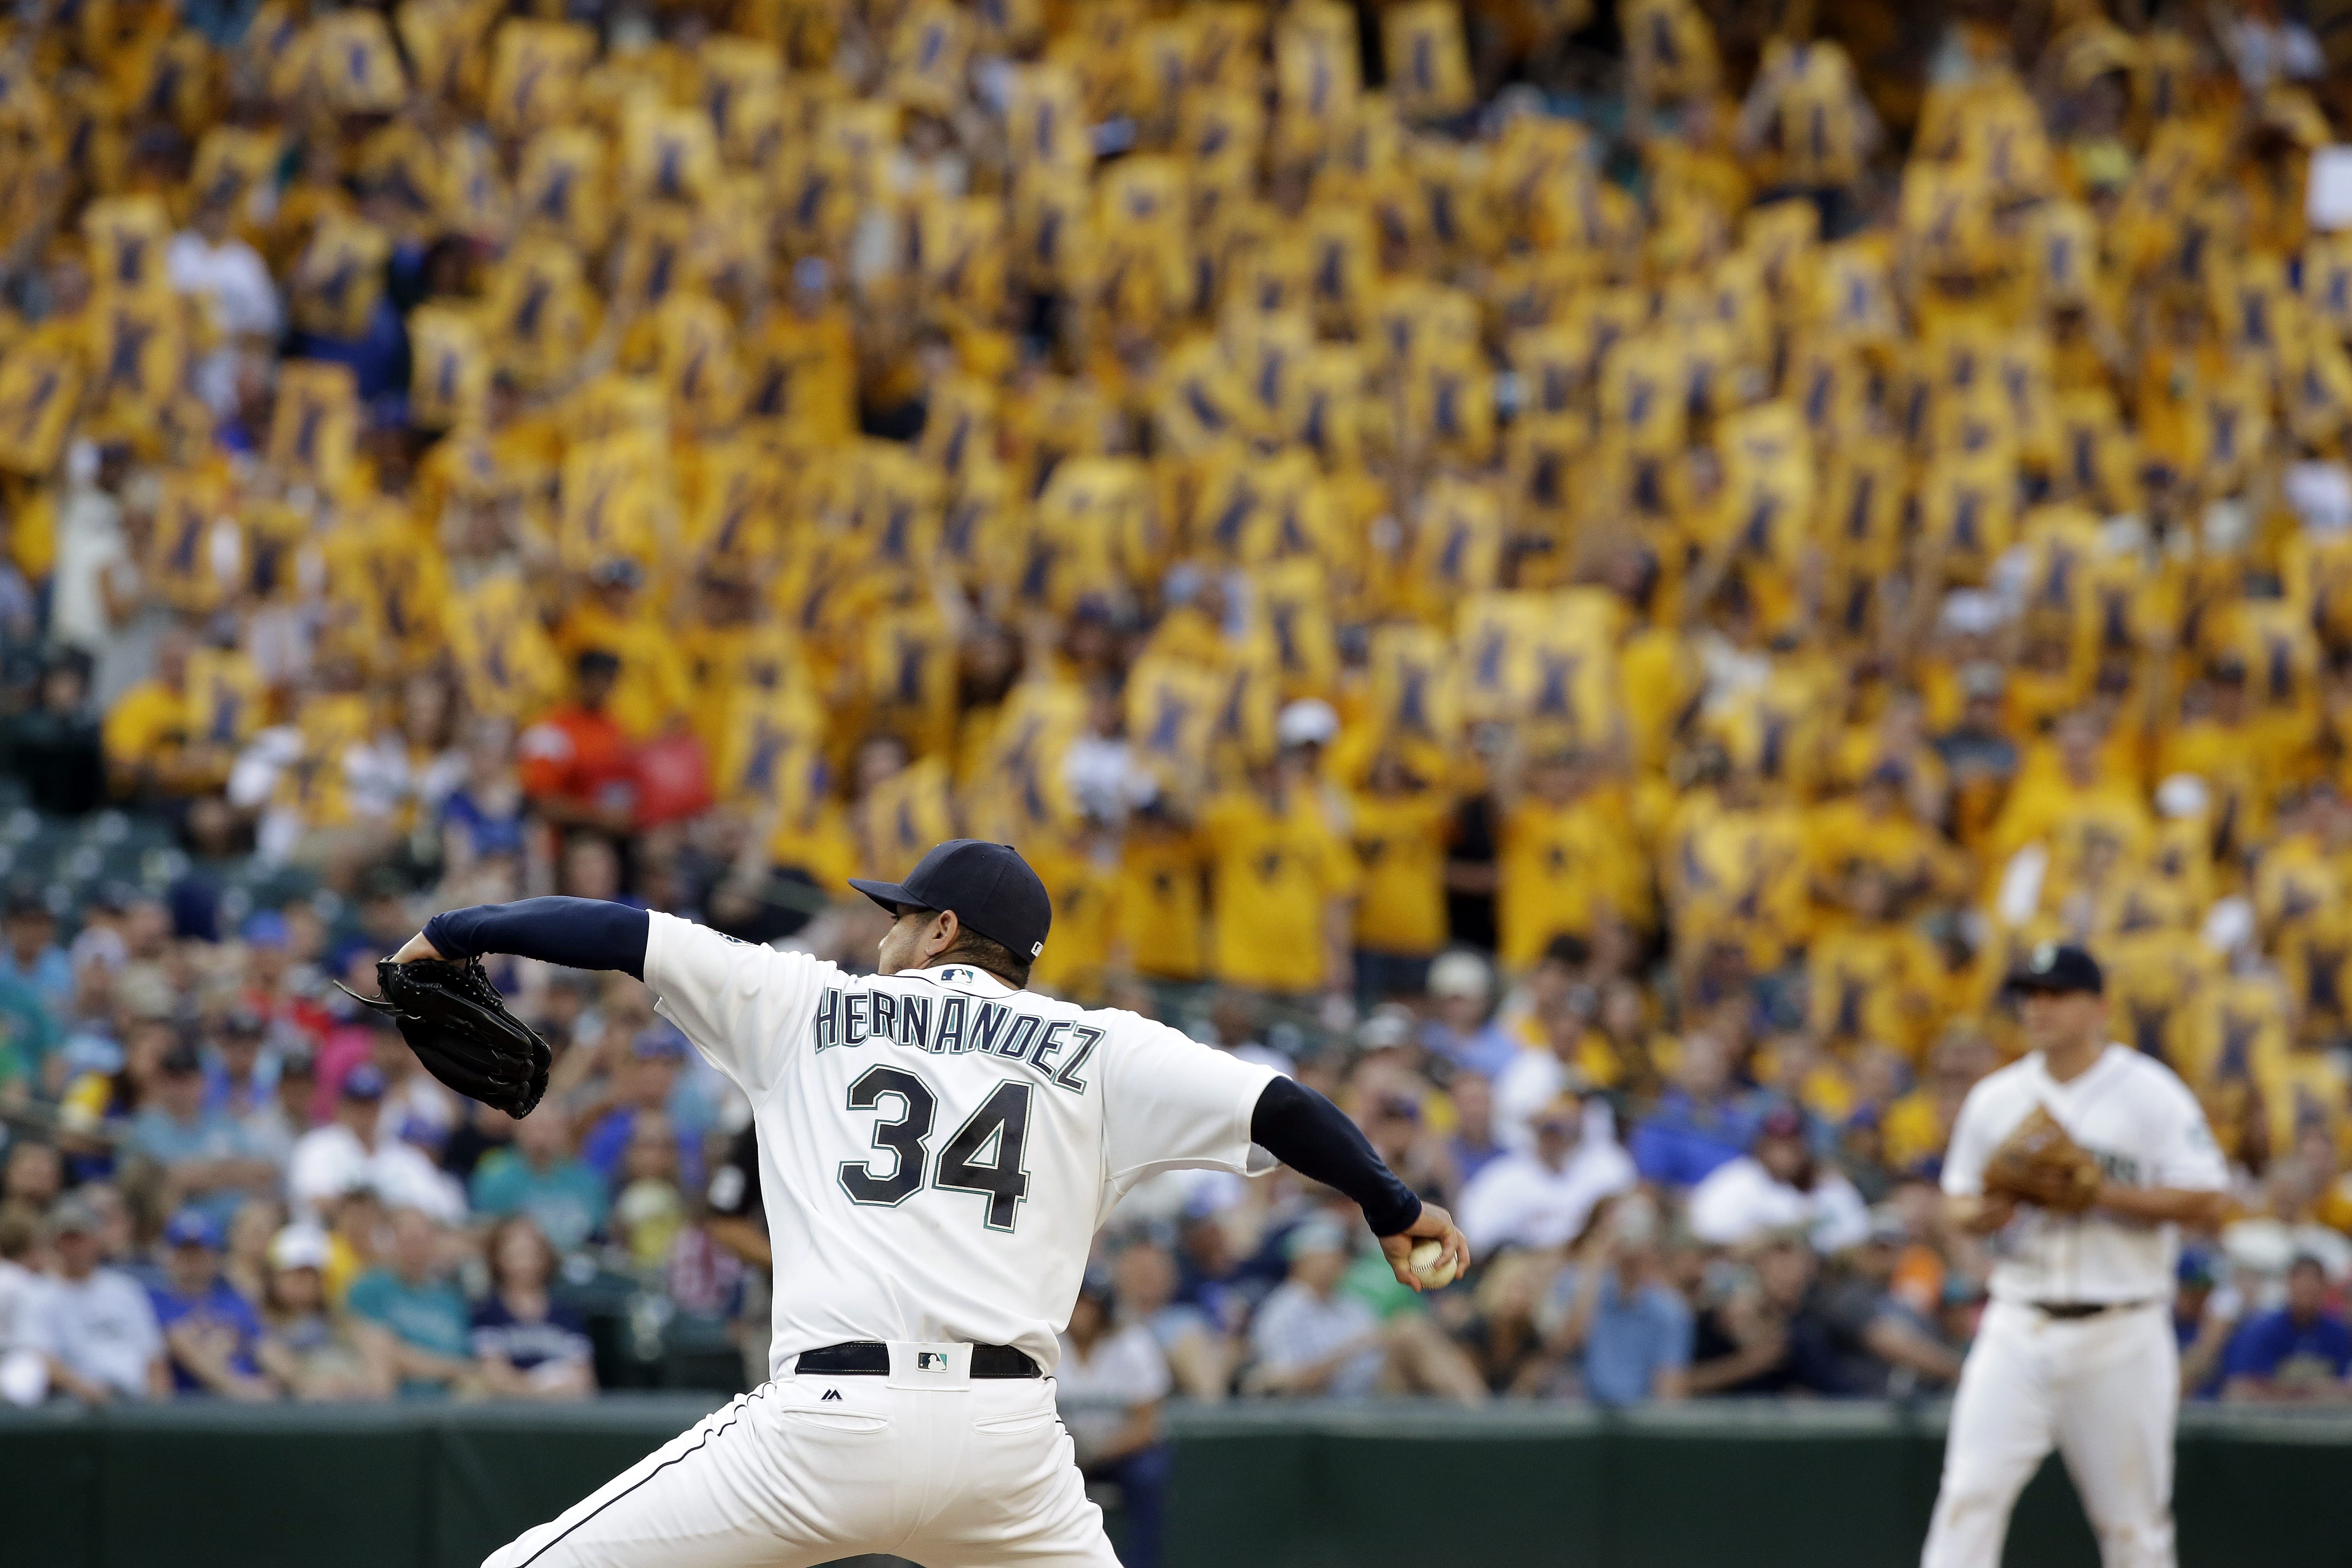 Seattle Mariners starting pitcher Felix Hernandez in action against the Milwaukee Brewers in aa baseball game Saturday, Aug. 20, 2016, in Seattle.